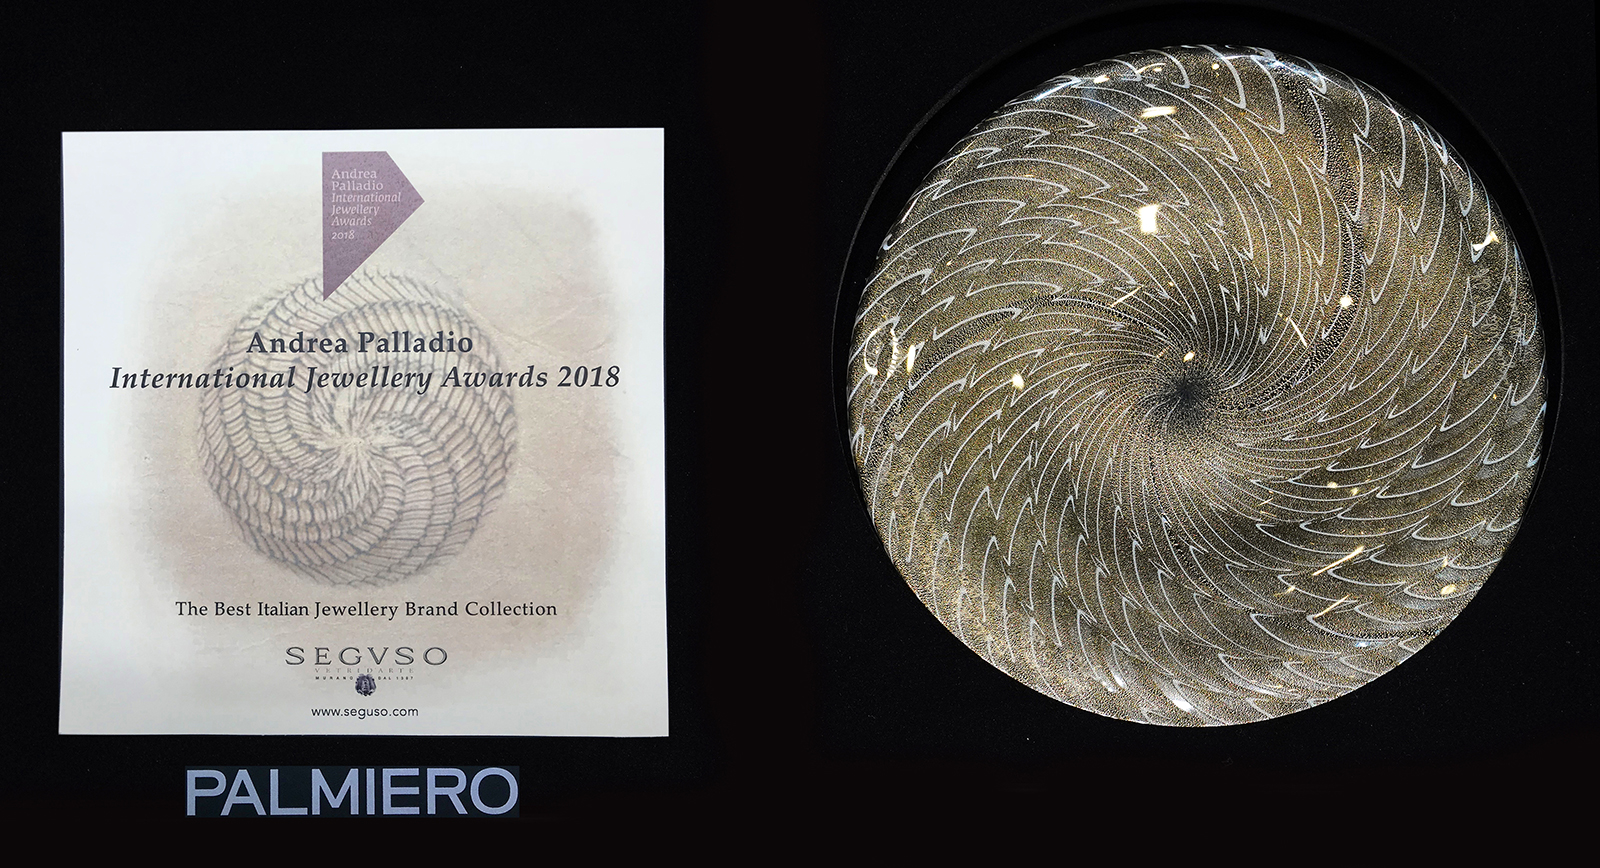 Palmiero wins Andrea Palladio International Jewellery Awards for Best Collection